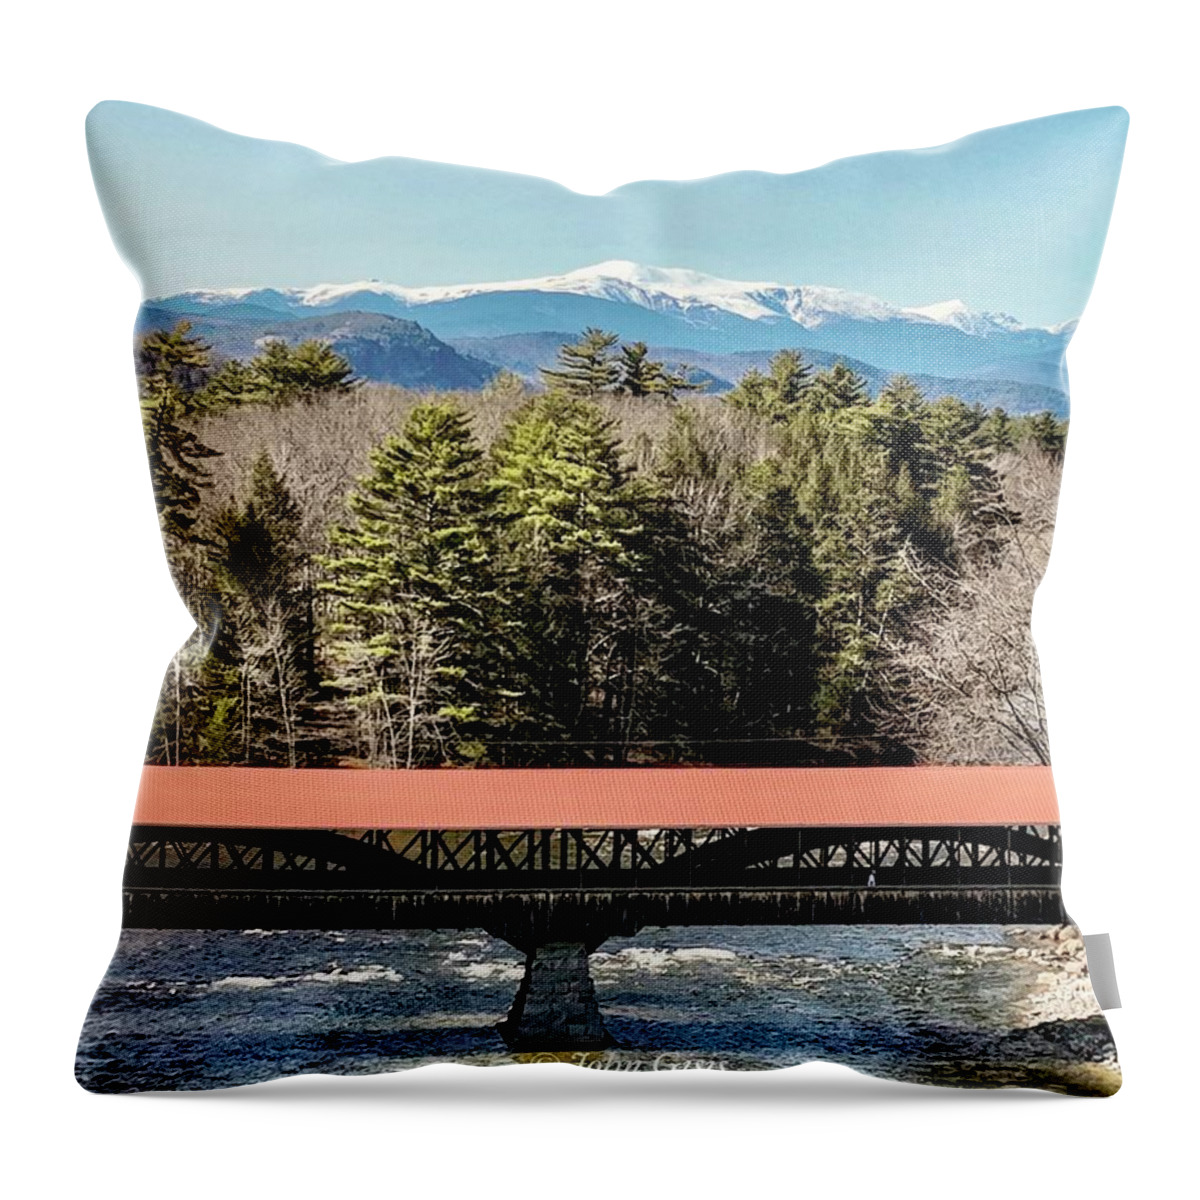  Throw Pillow featuring the photograph Mt Washington over the Saco River Covered Bridge by John Gisis